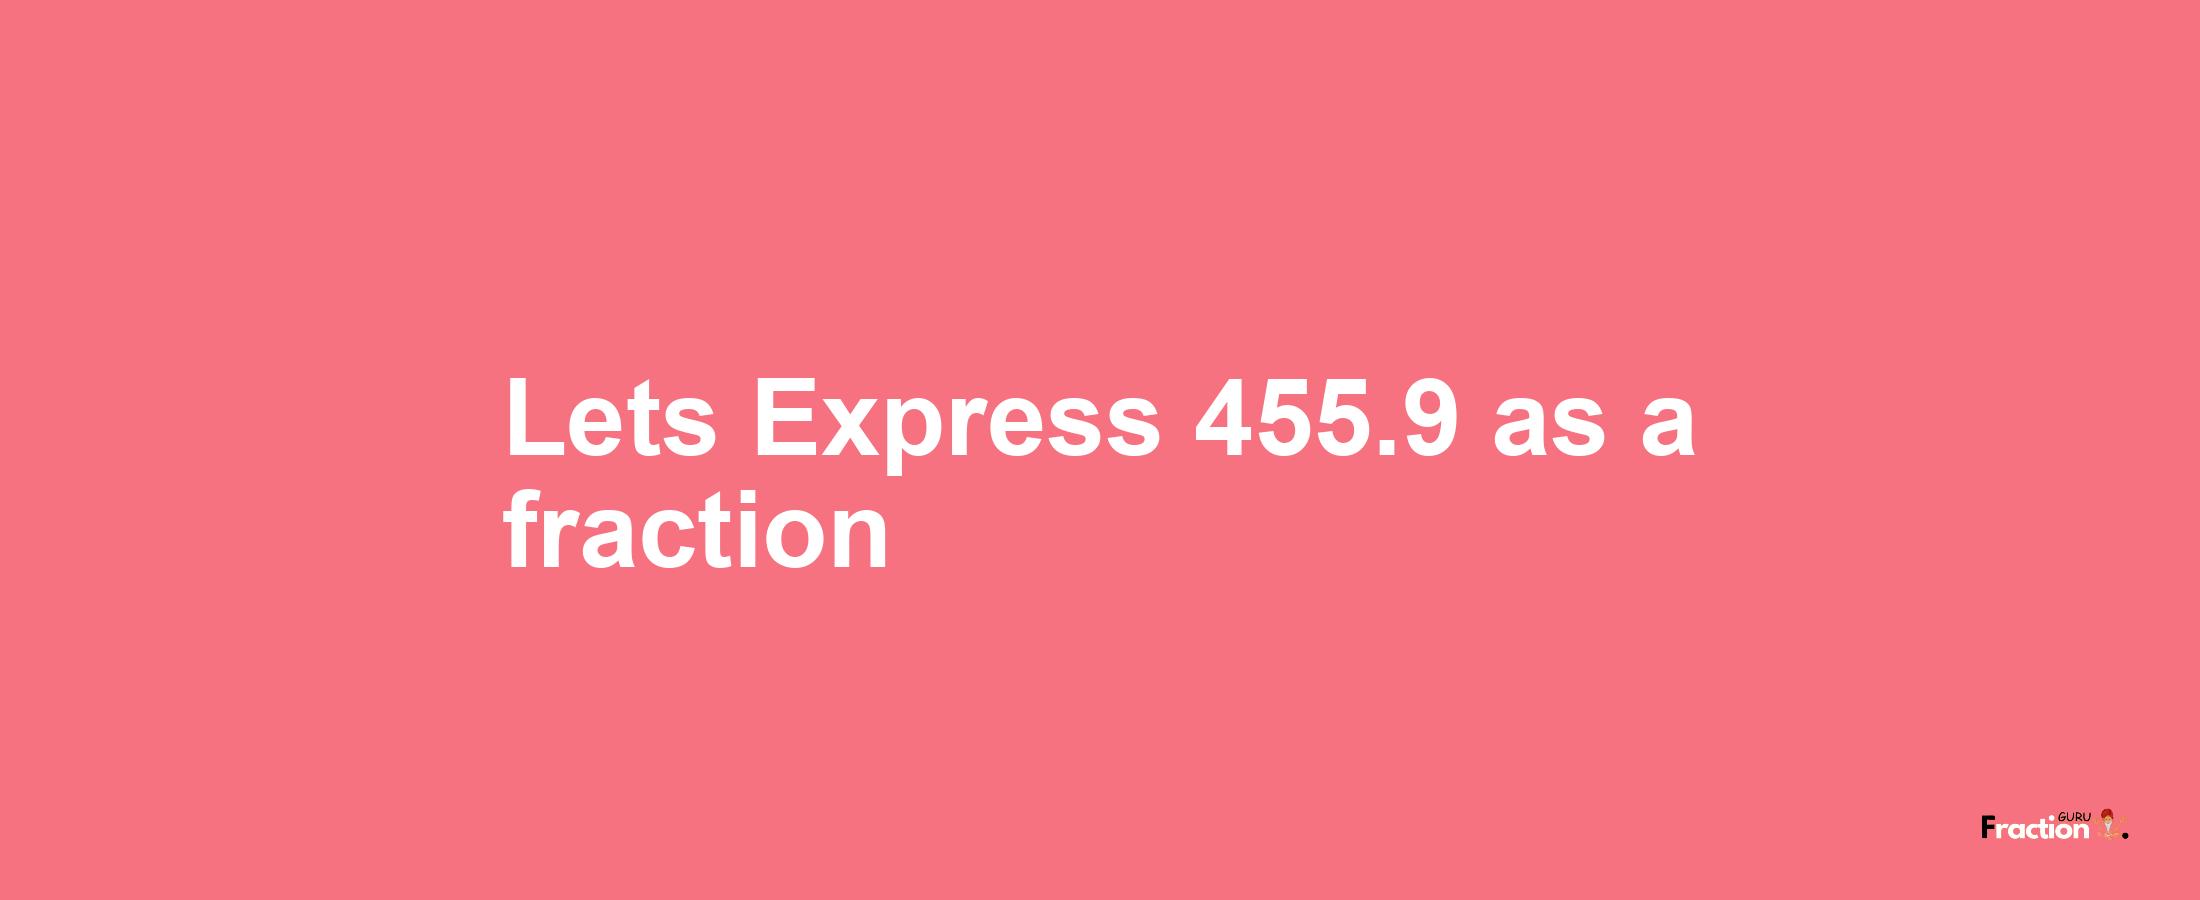 Lets Express 455.9 as afraction